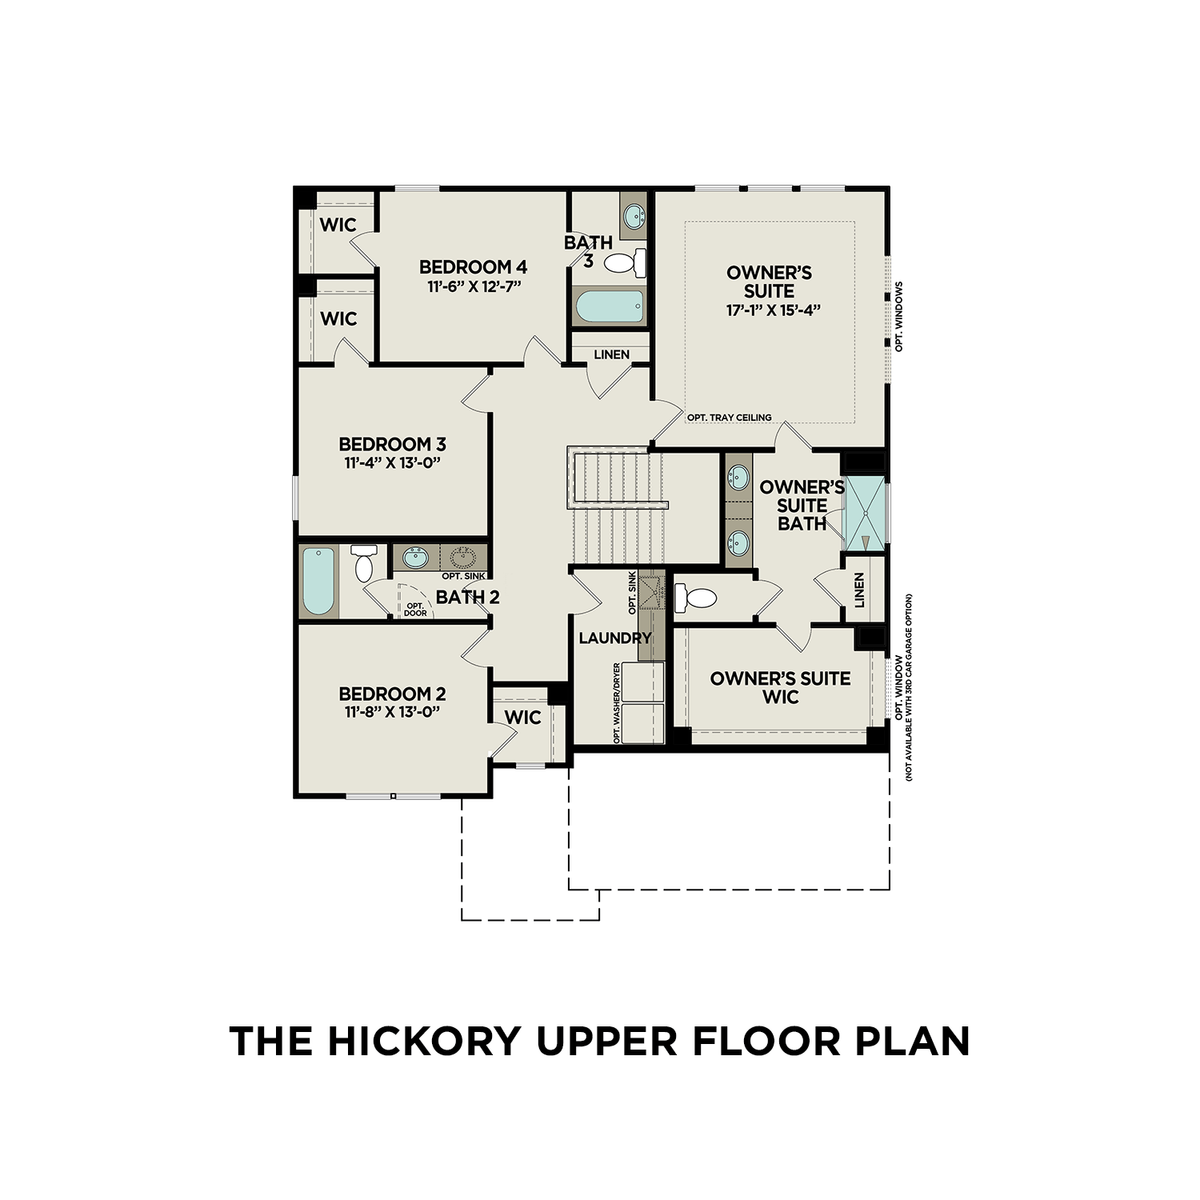 2 - The Hickory C floor plan layout for 446 Black Walnut Drive in Davidson Homes' Carellton community.